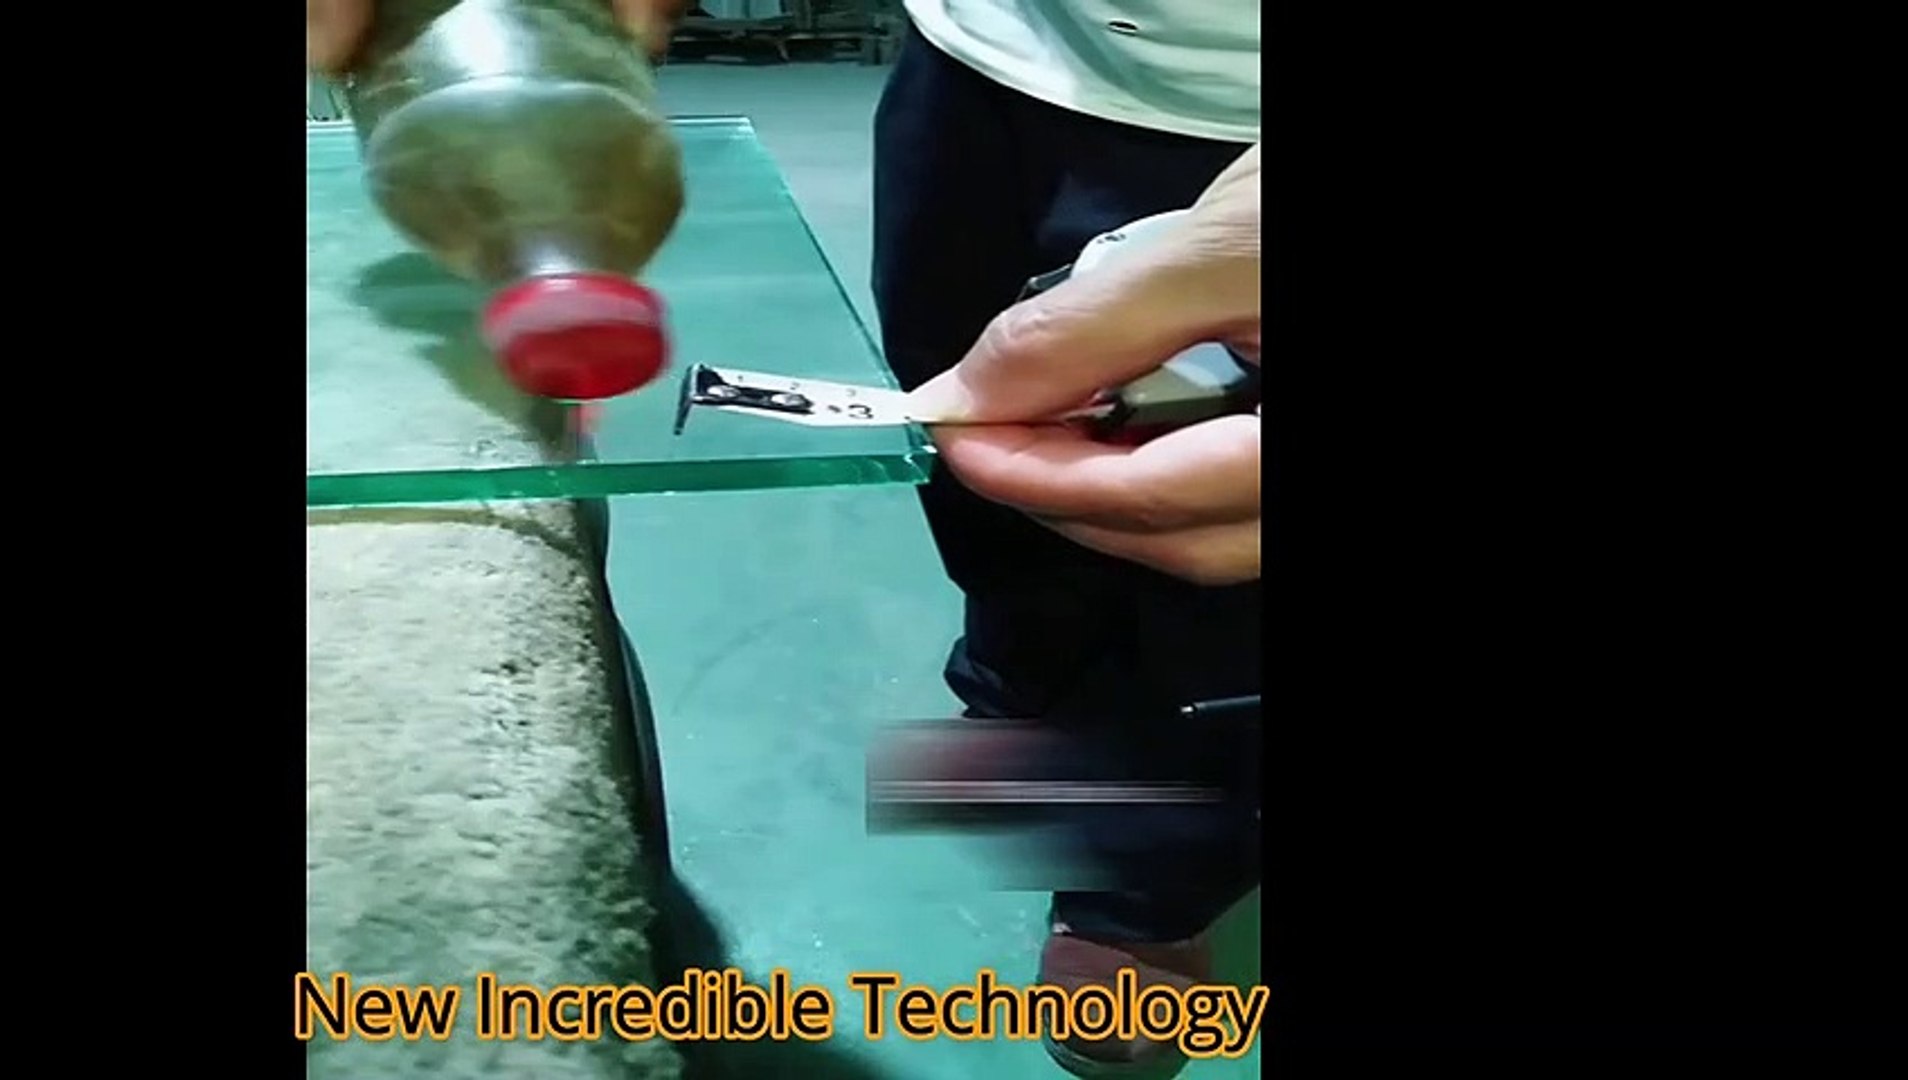 New Incredible Technology || Technology videos.